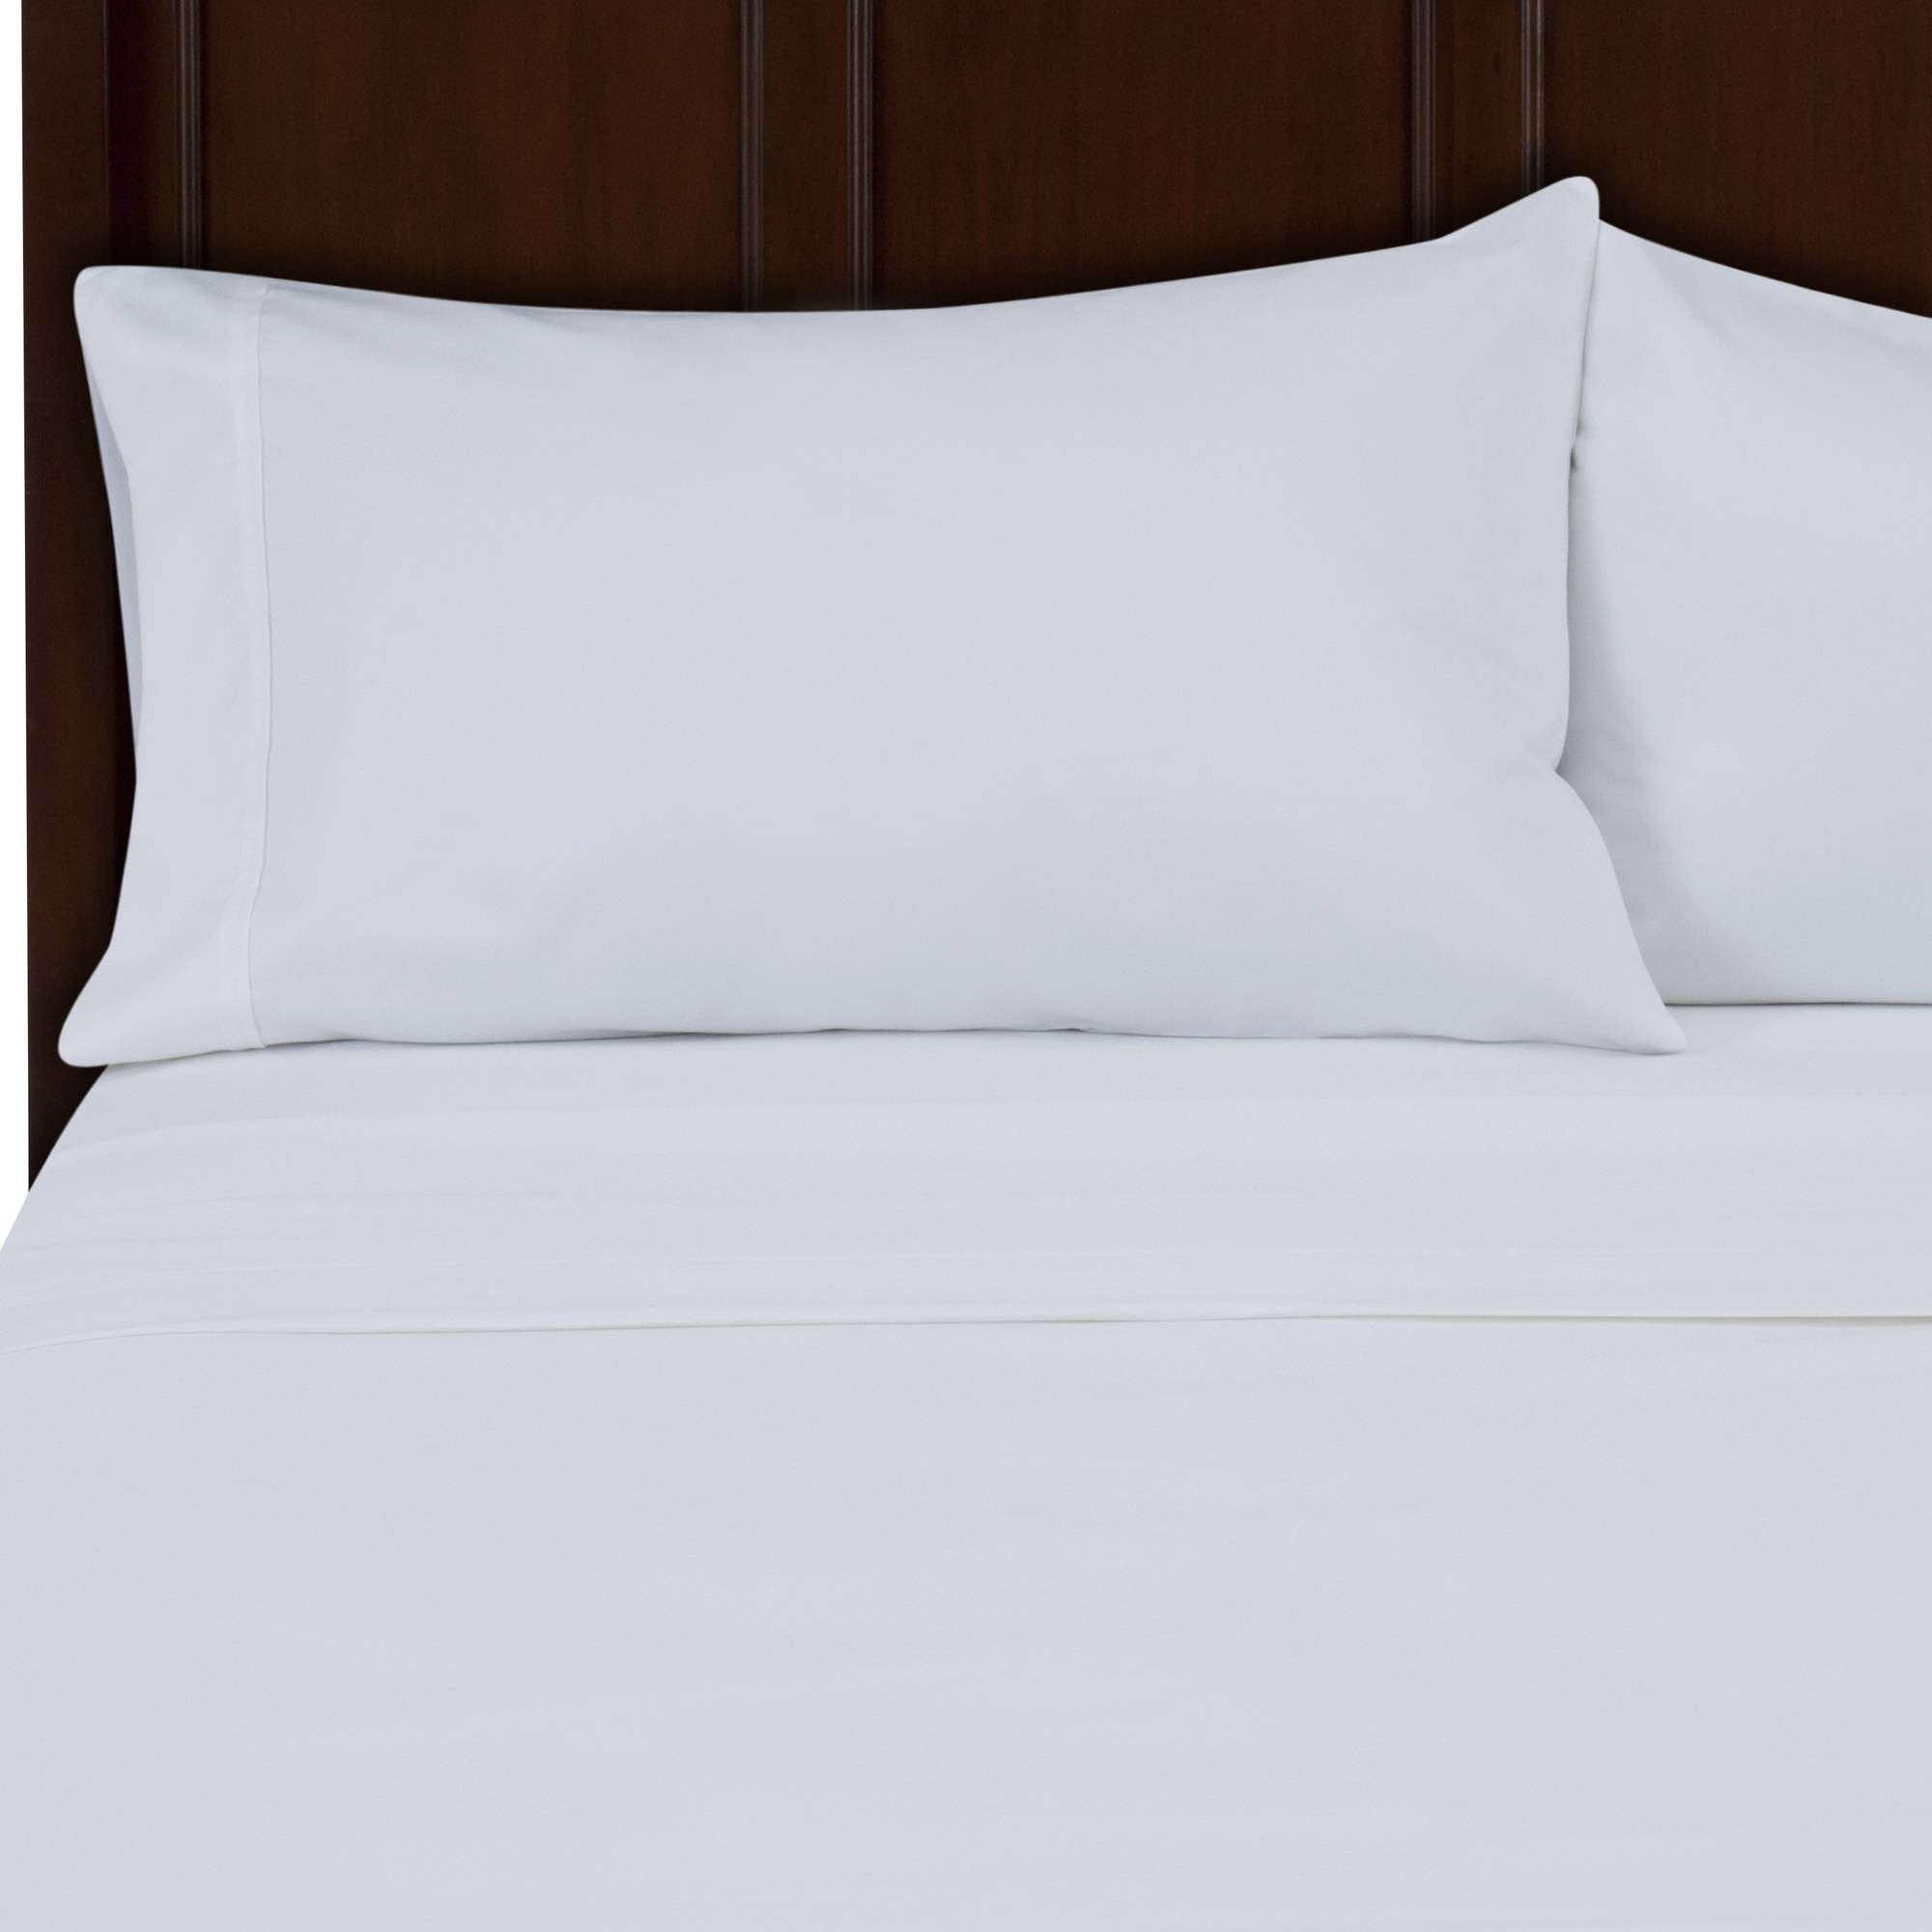 Hotel Style 1100 Thread Count Bedding Sheet Set - image 1 of 1